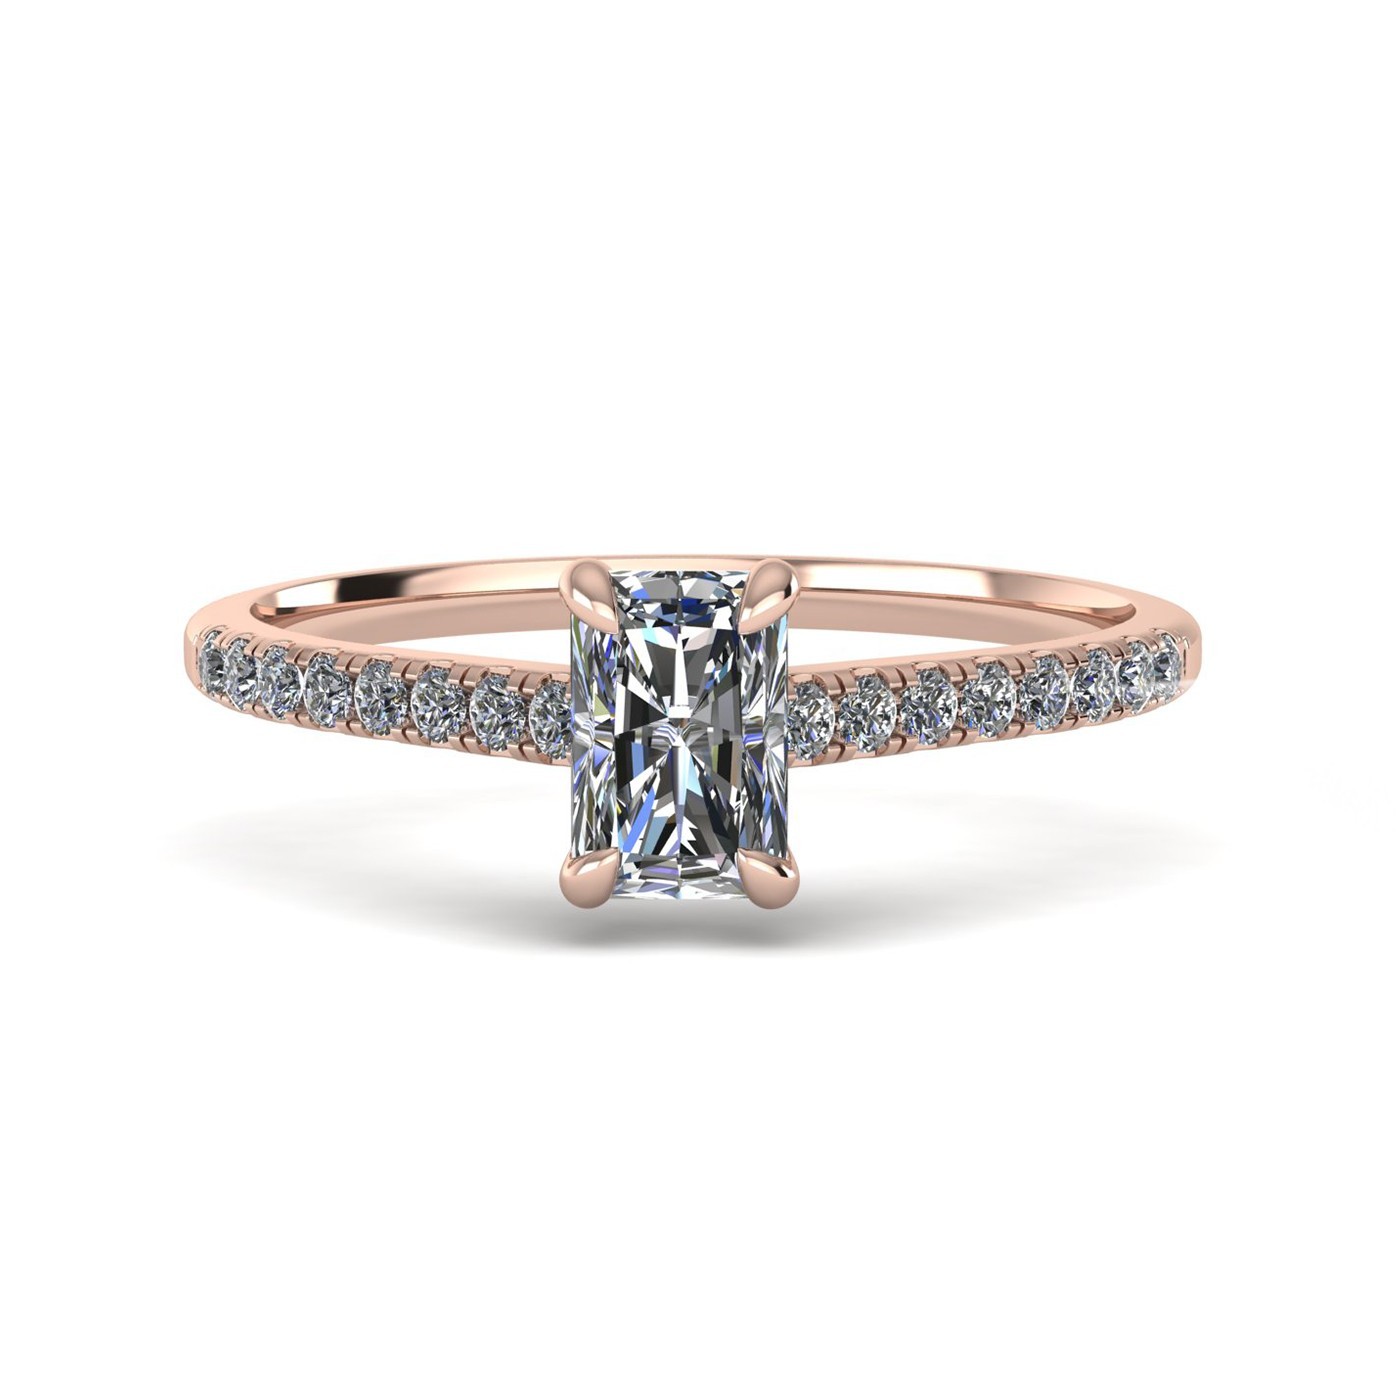 18k rose gold  1,00 ct 4 prongs radiant cut diamond engagement ring with whisper thin pavÉ set band Photos & images